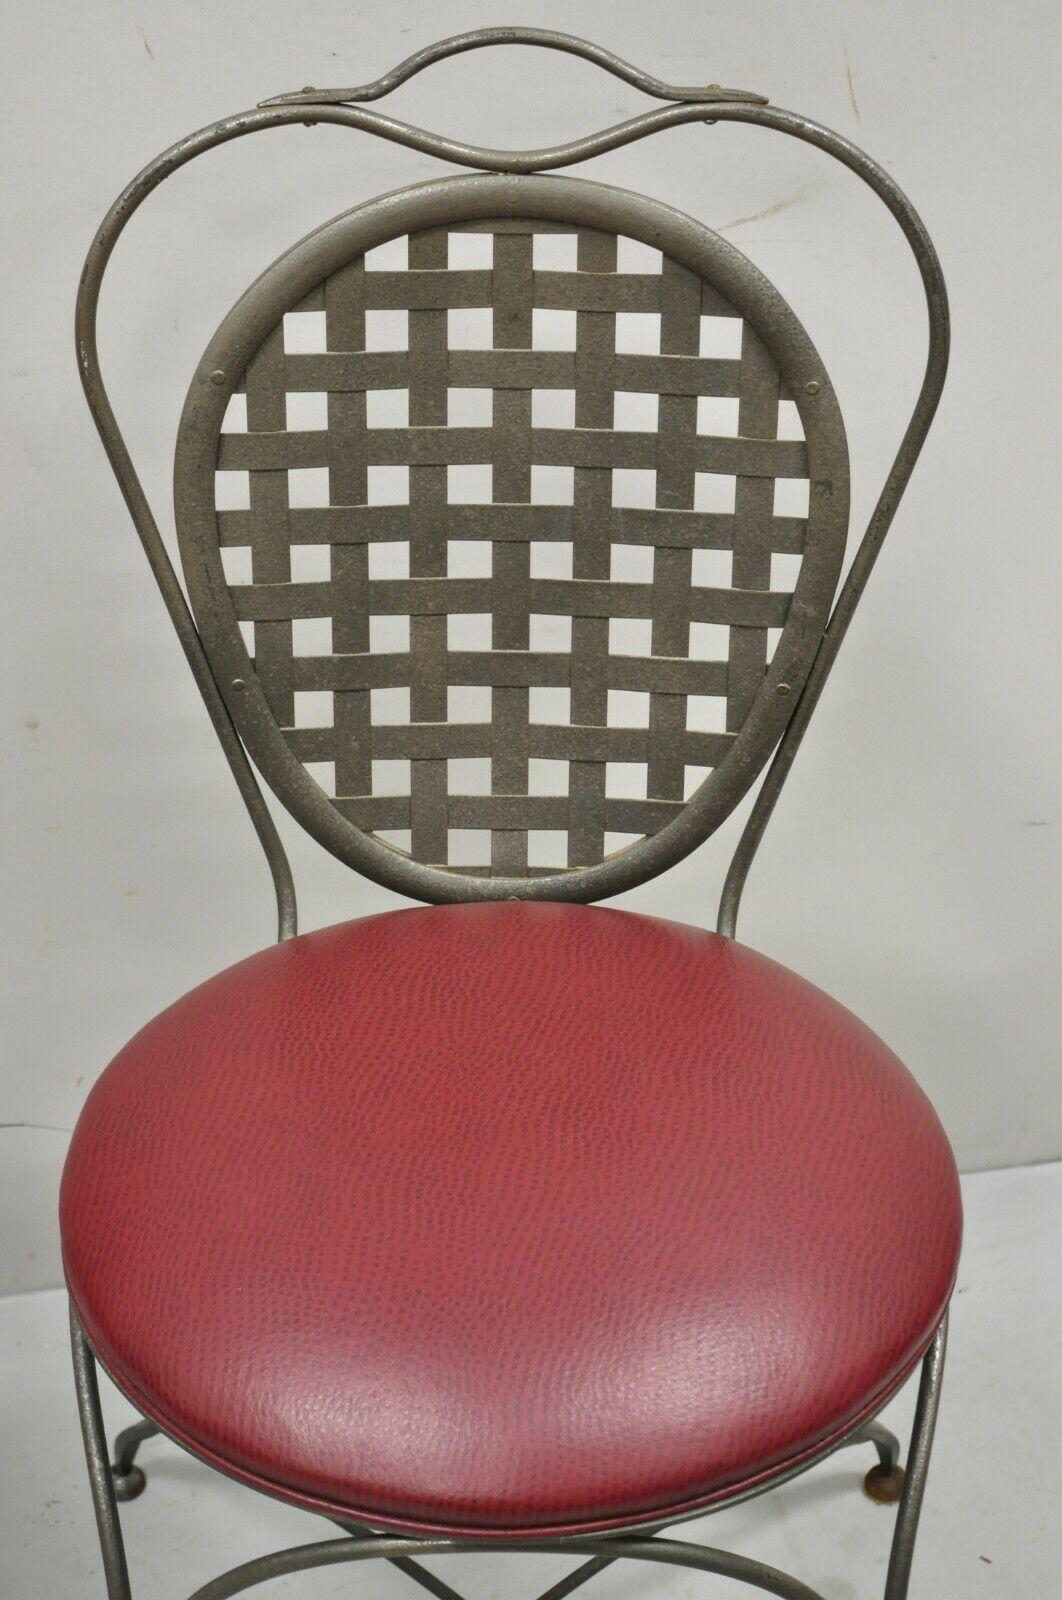 Italian Regency Style Wrought Iron Sunroom Lattice Round Seat Chairs, a Pair In Good Condition For Sale In Philadelphia, PA